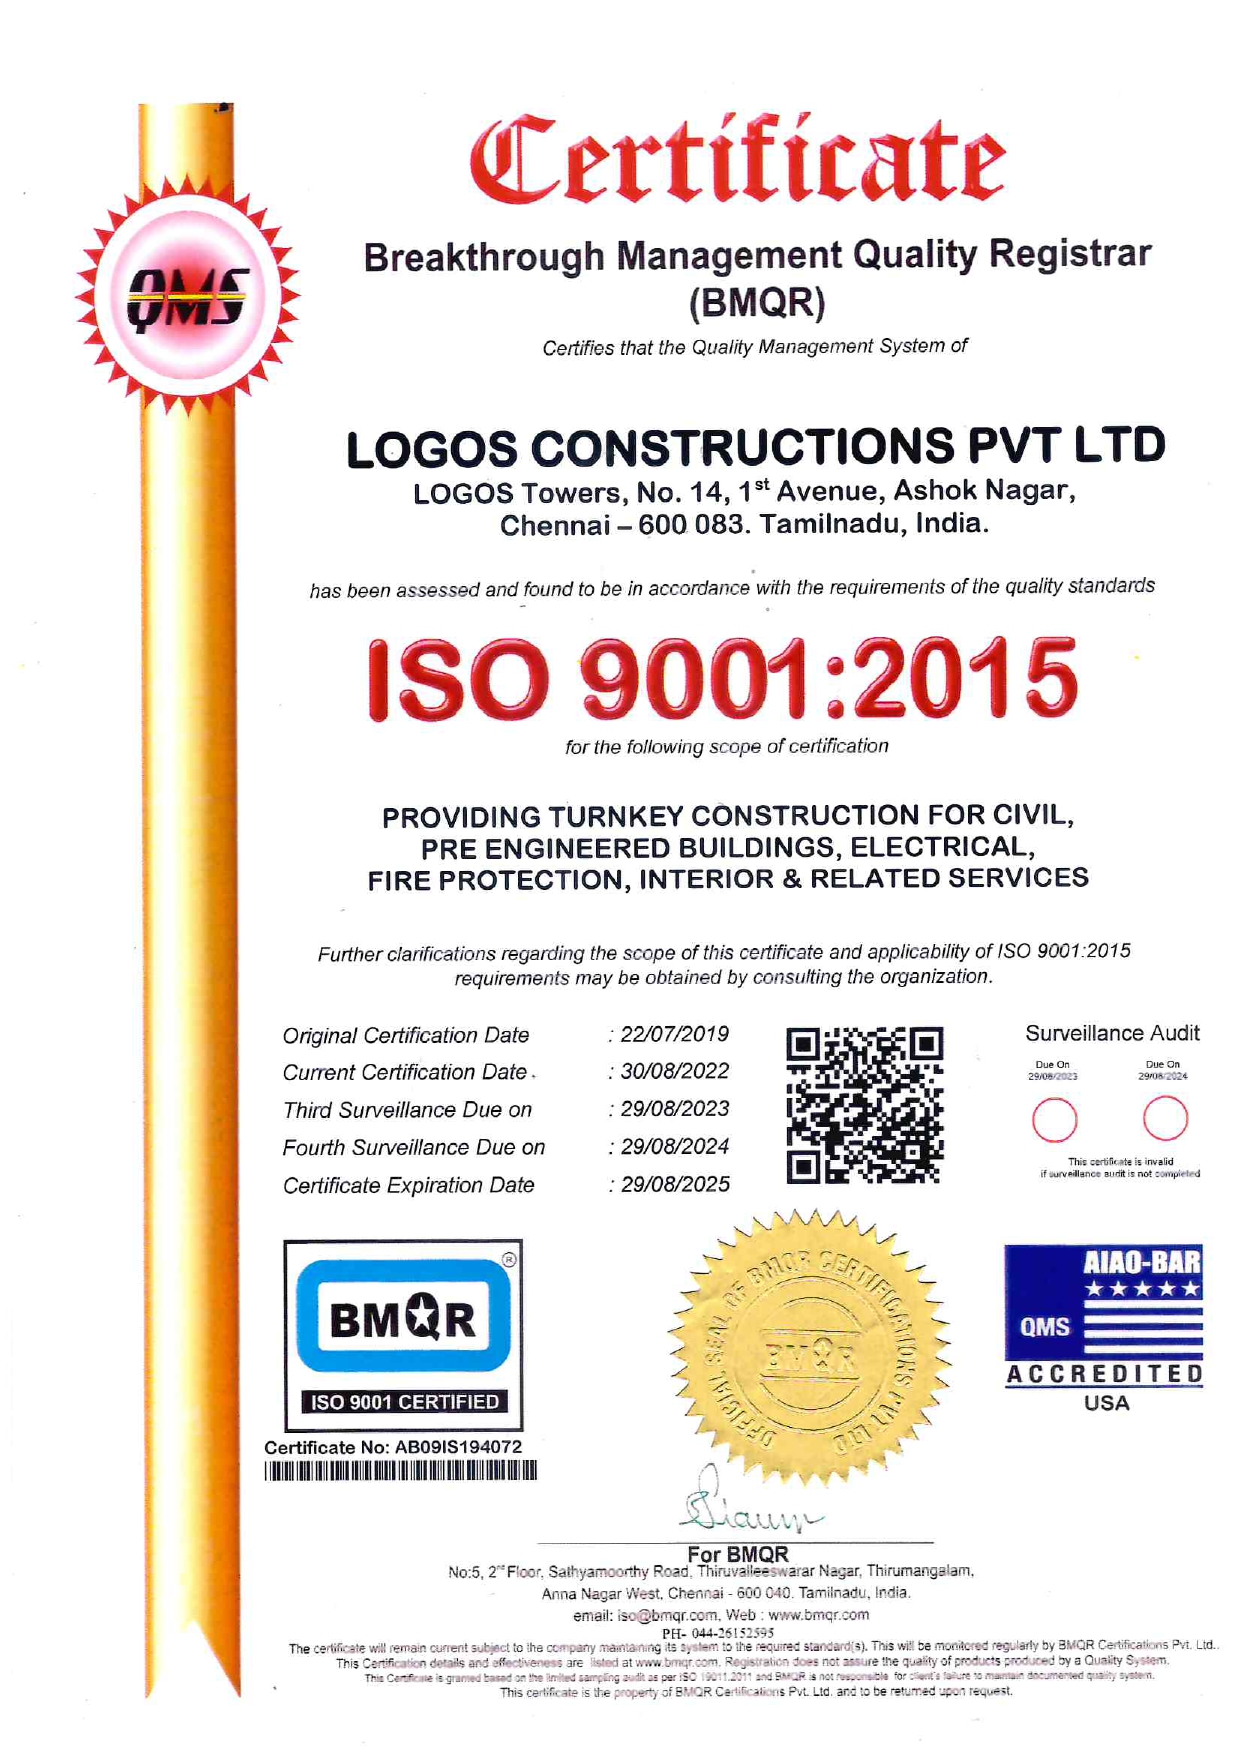 ISO 9001 Certification Body BMQR helps the organization to grow